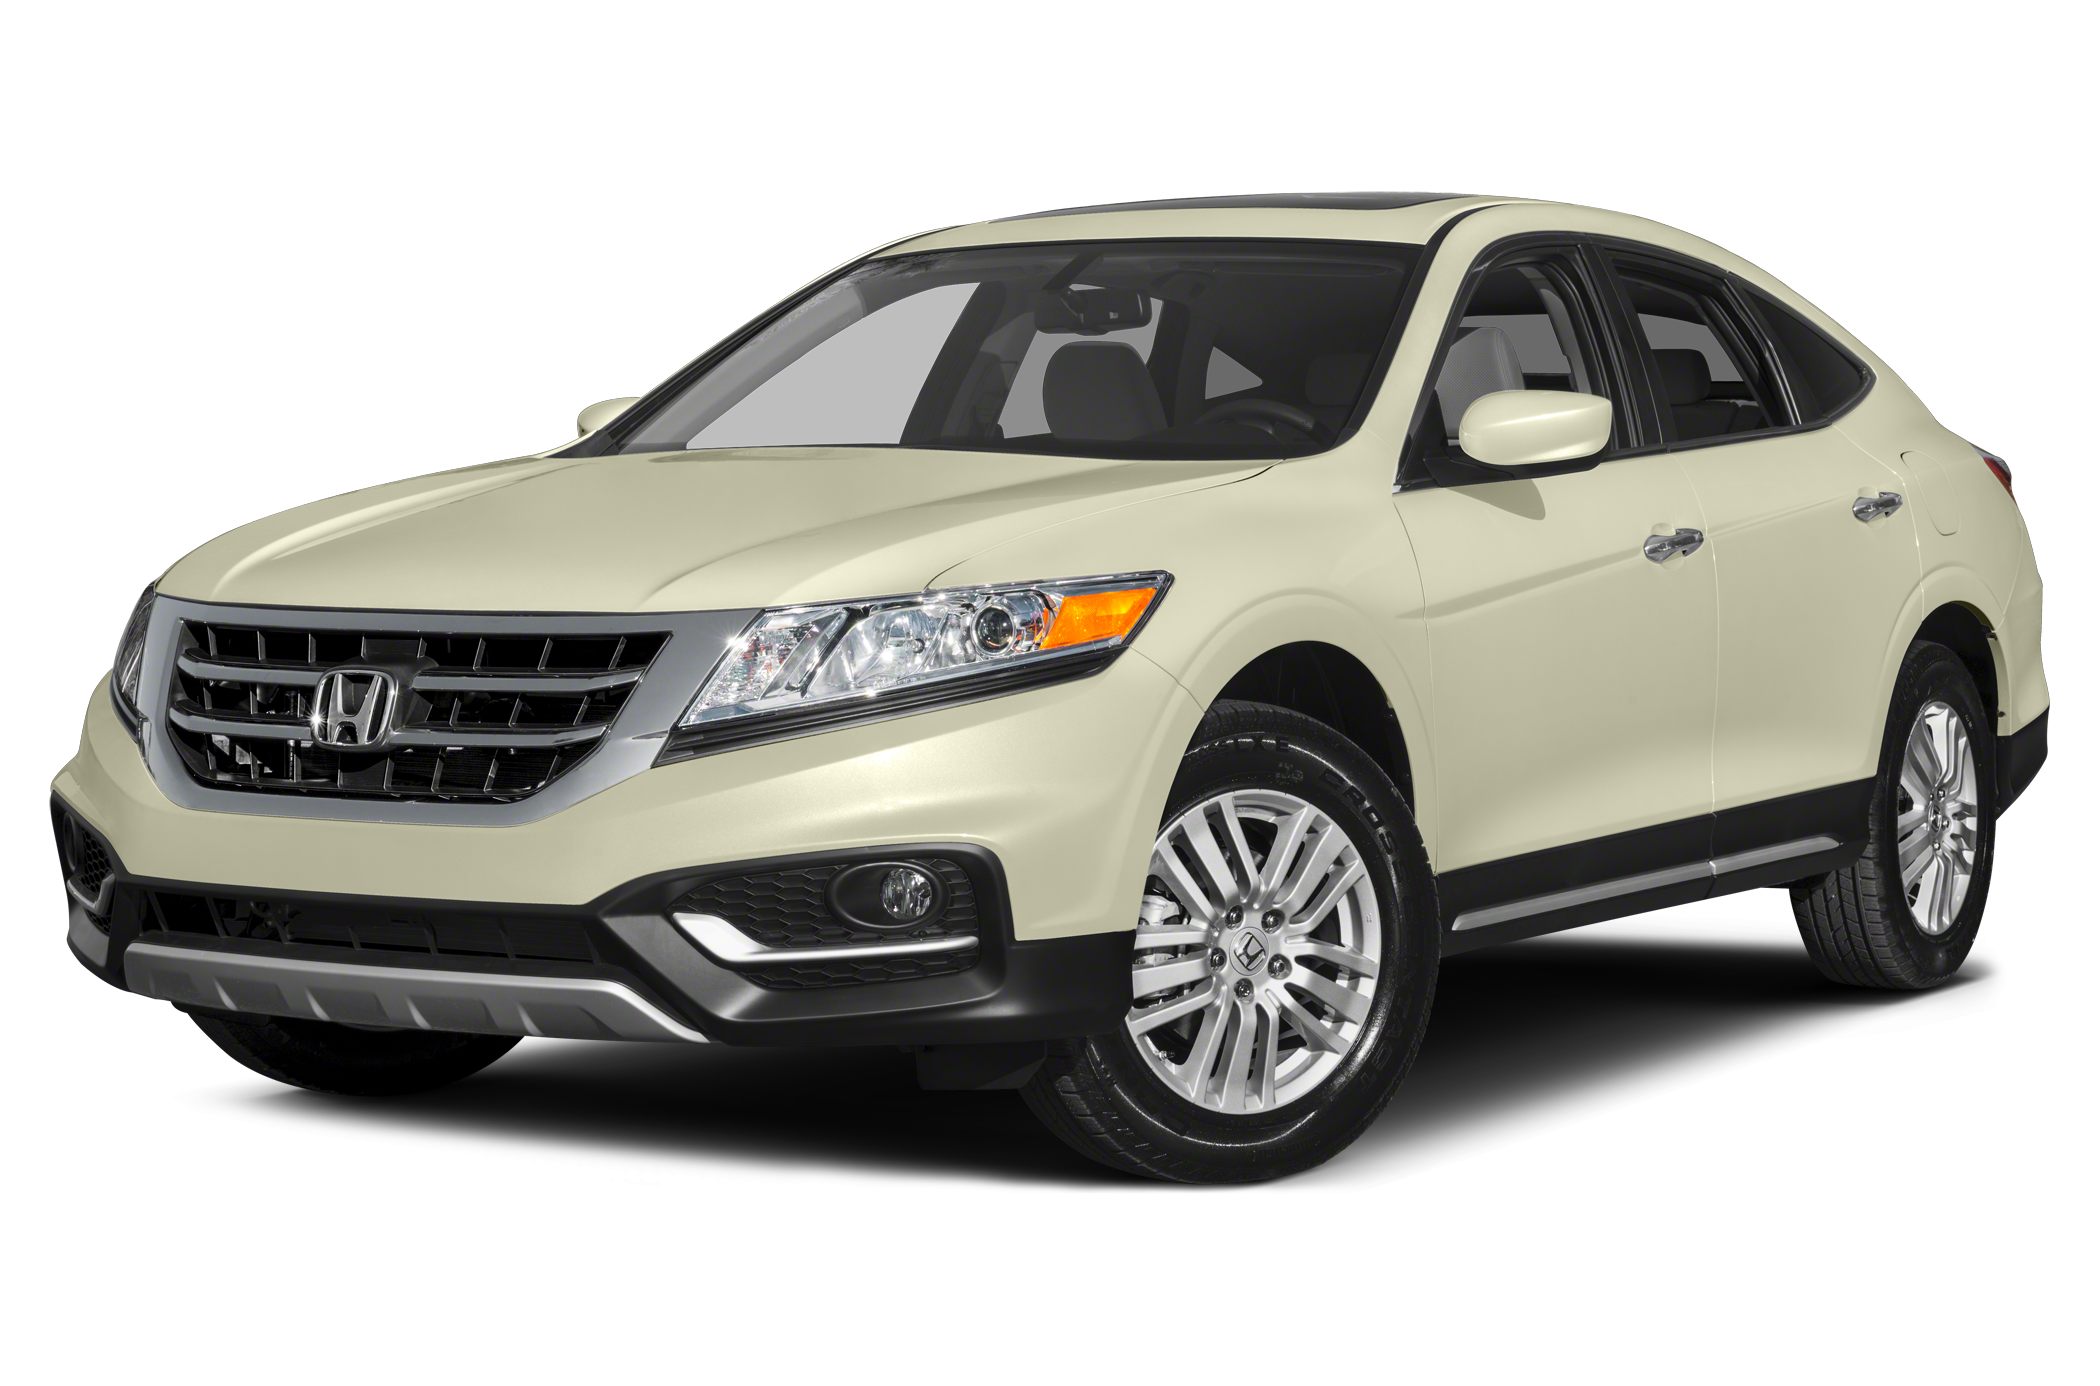 2015 Honda Crosstour oem parts and accessories on sale